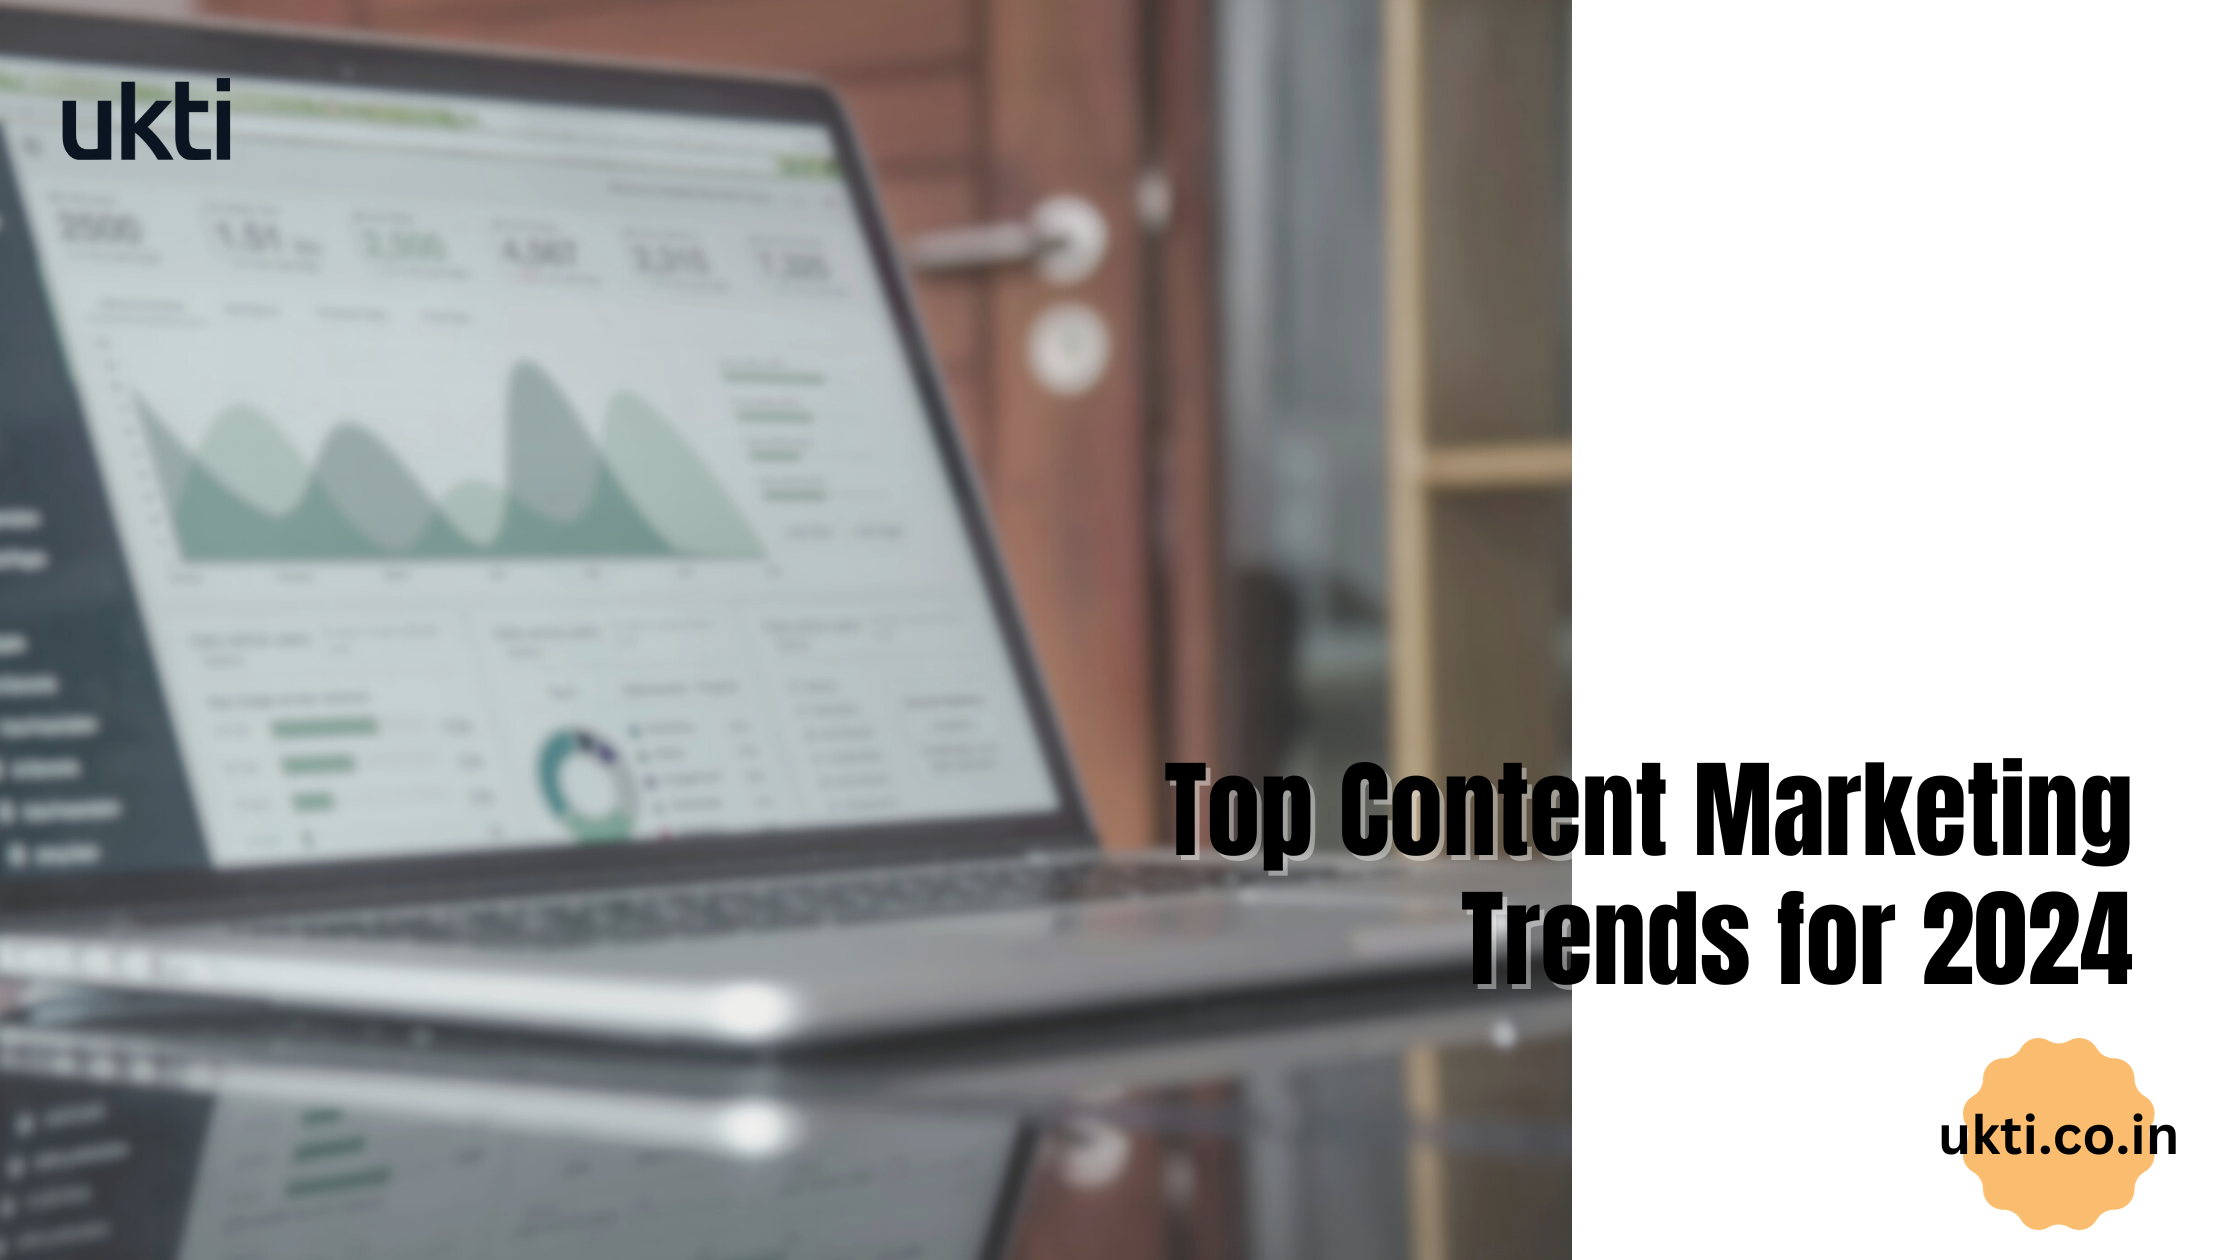 Top 5 Content Marketing Trends for 2024 You Need To Know